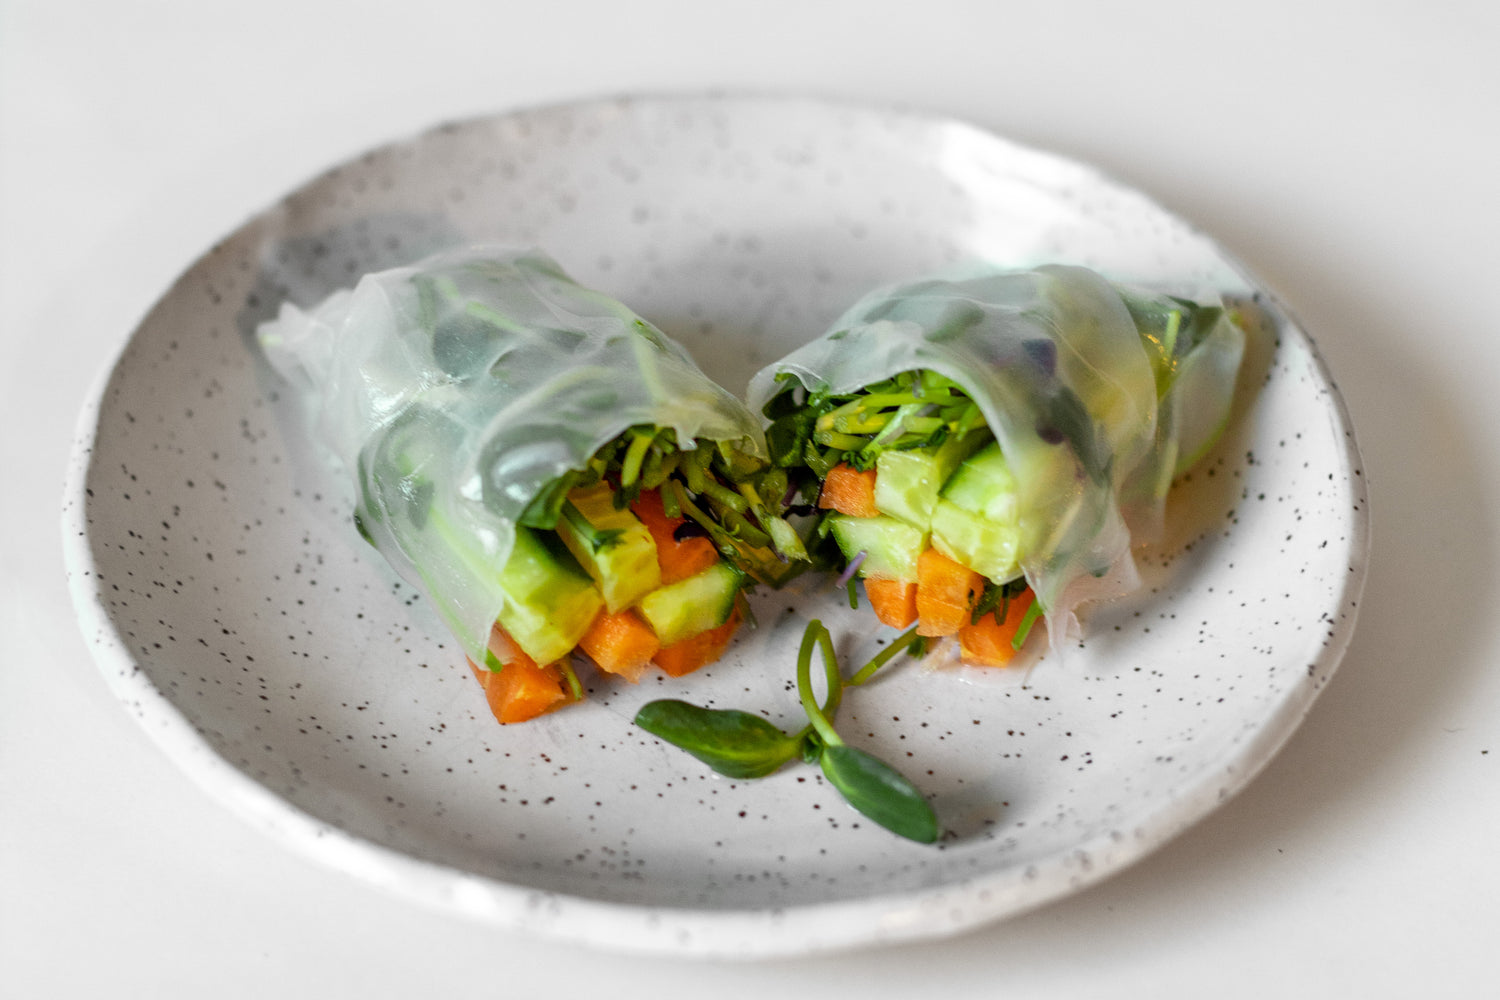 Image of a rice paper roll on a plate against a white background. The roll is cut in half and filled with an assortment of vegetables, including collar greens, cucumber, carrots, and microgreens.